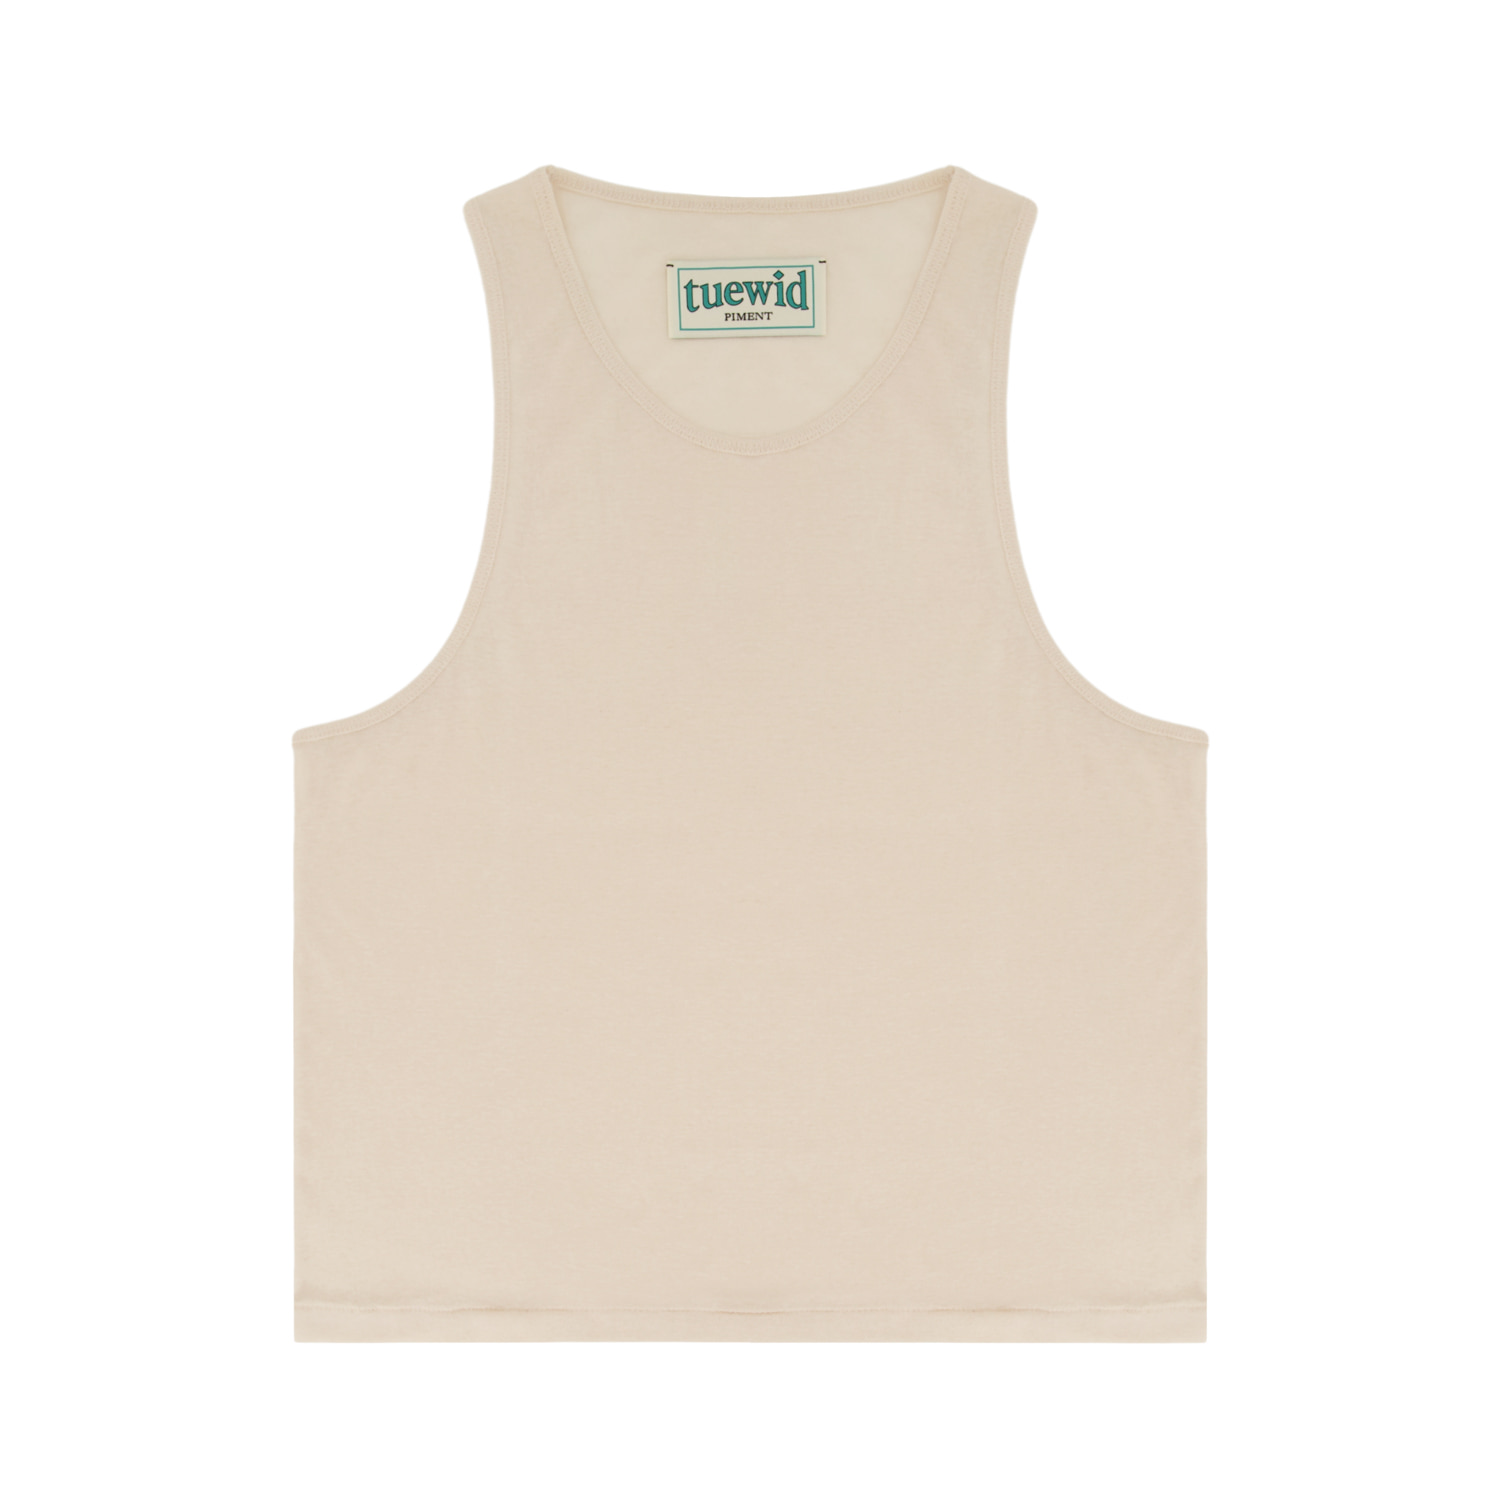 Tuewid oversized sleeveless top for MENS